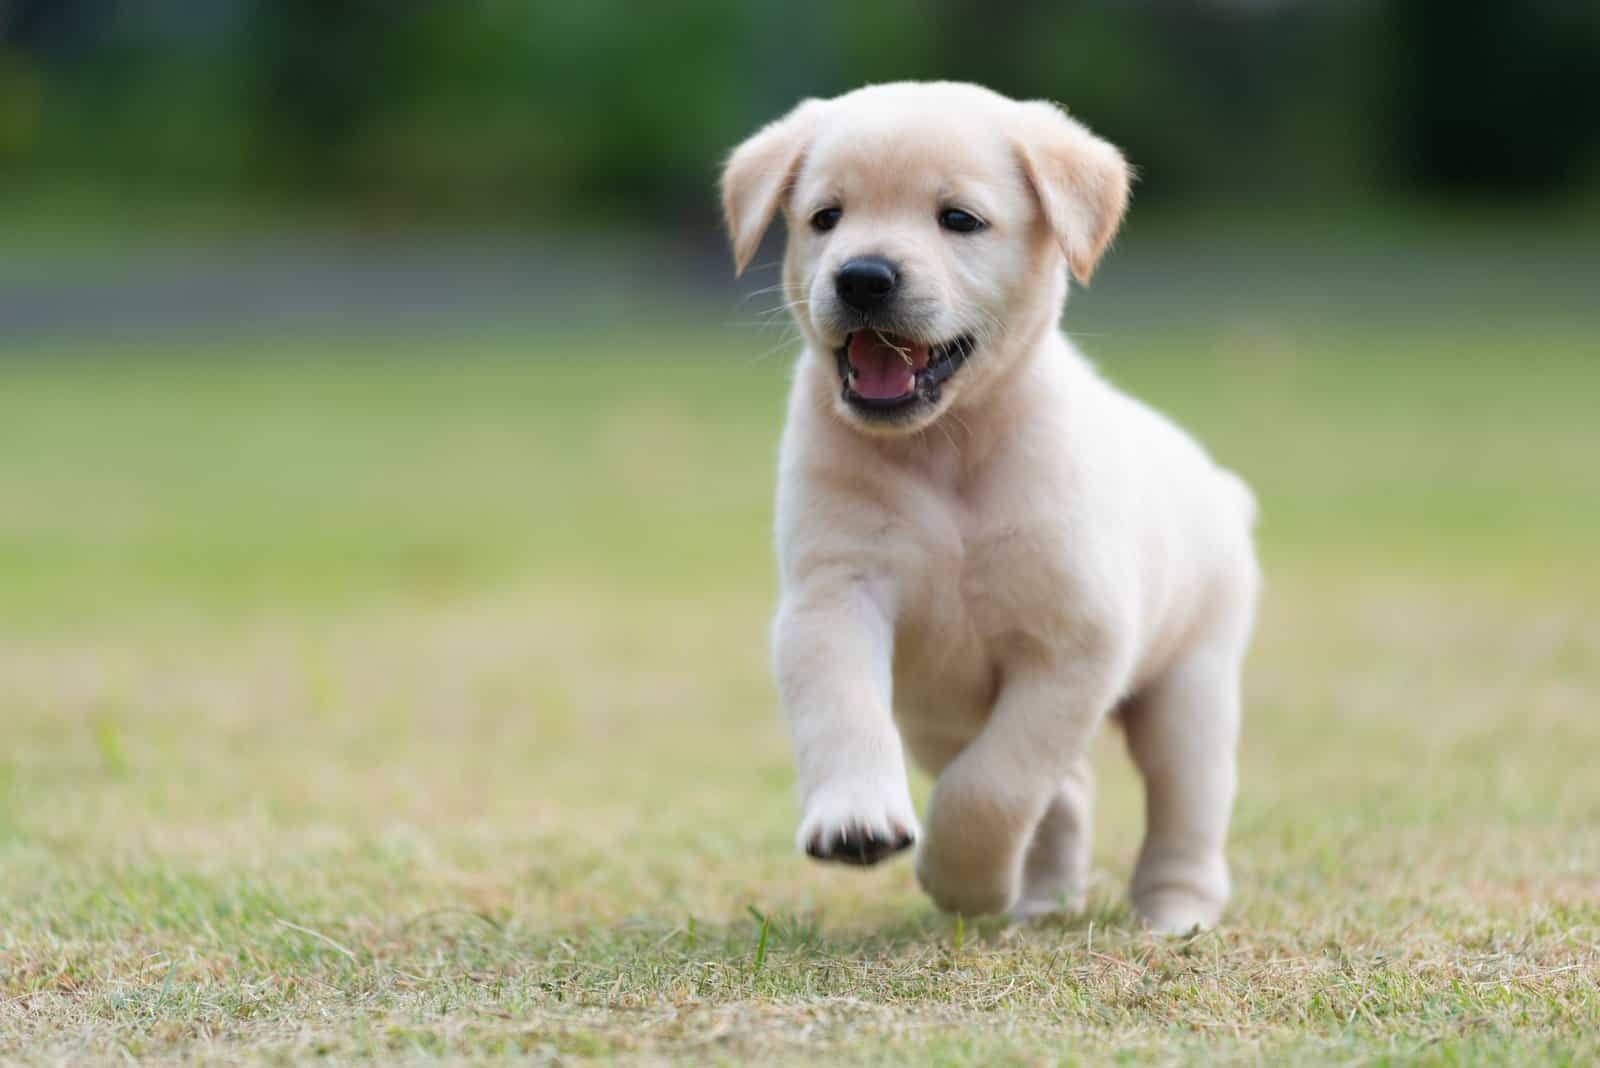 The Top 10 Most Reputable Golden Retriever Breeders In The UK